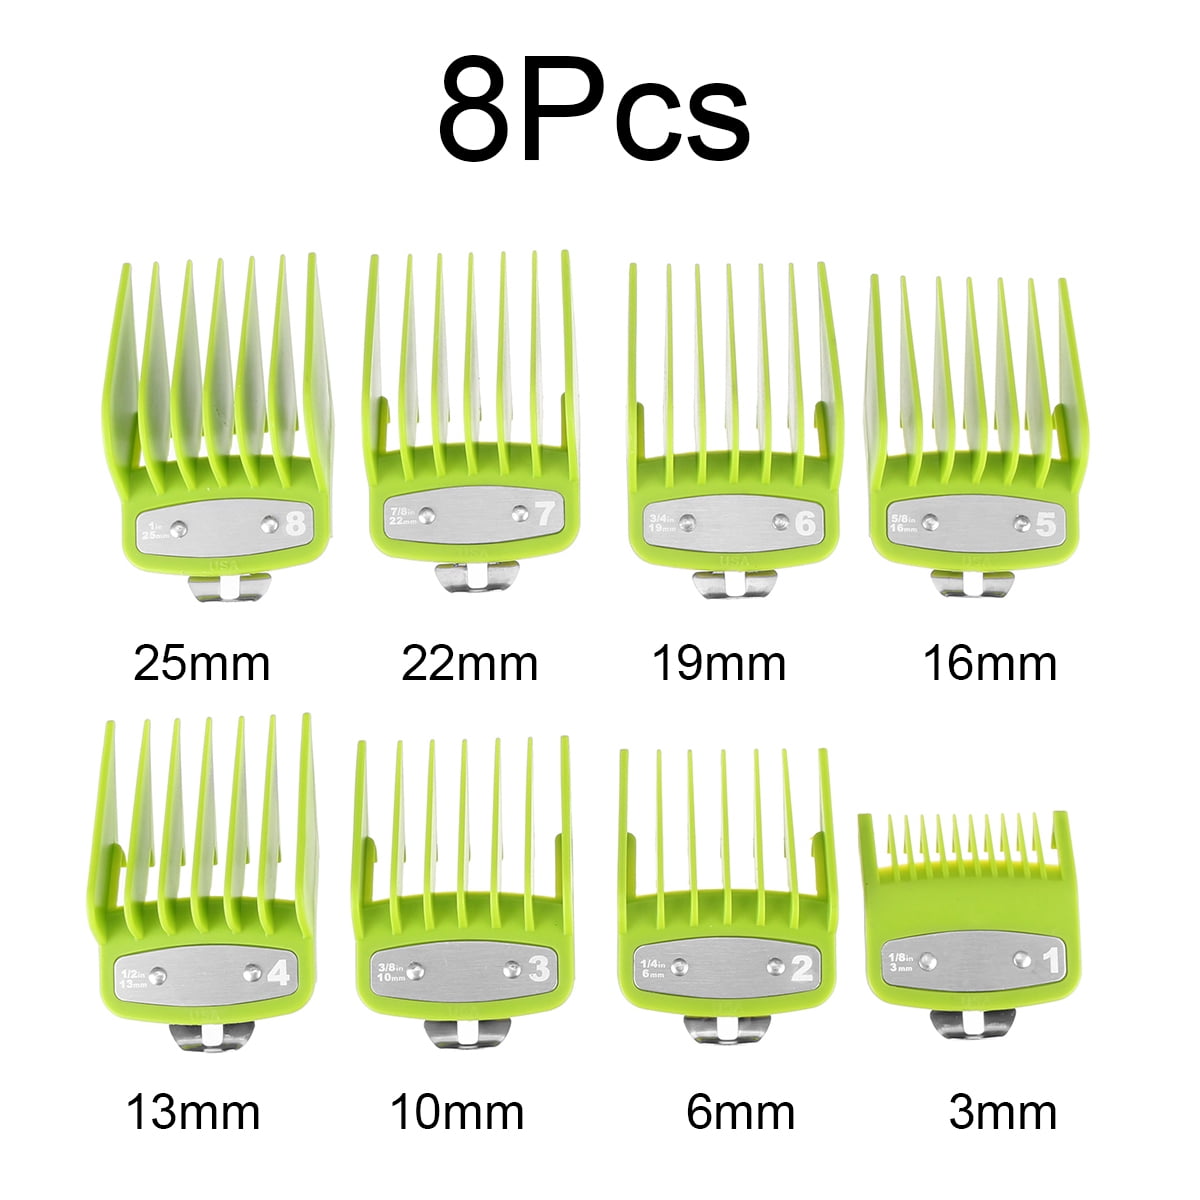 hair cutting guide comb